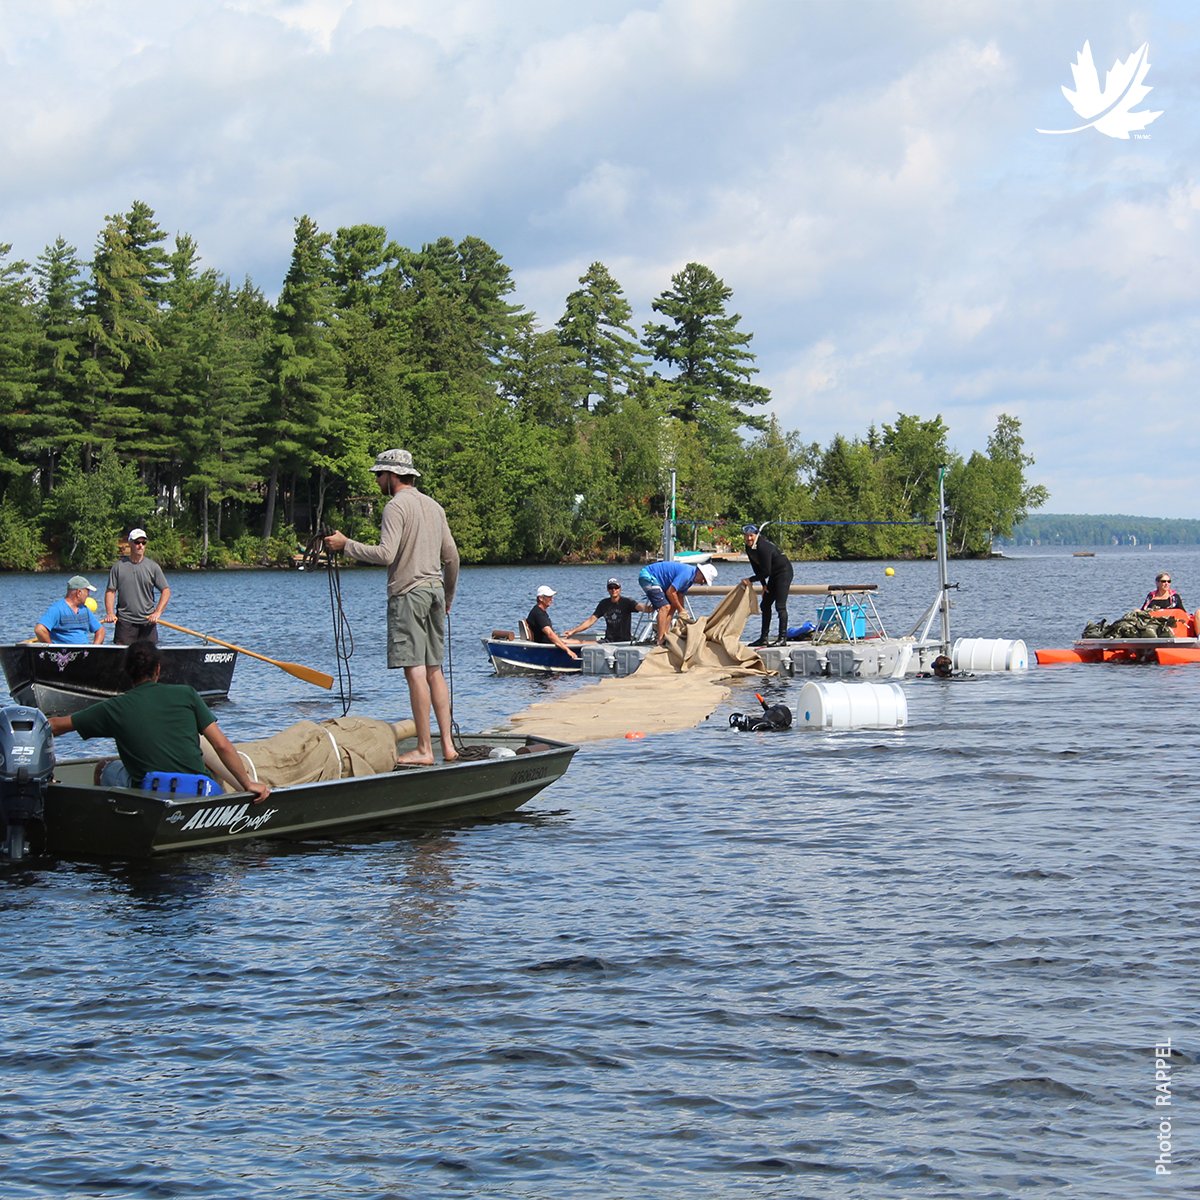 🚨 Eurasian milfoil is threatening the biodiversity of Lake Papineau in the Outaouais region! Together with the Kenauk Institute, we are working to halt its spread. Over 423 pounds have already been removed. ➡️ brnw.ch/21wJxsf